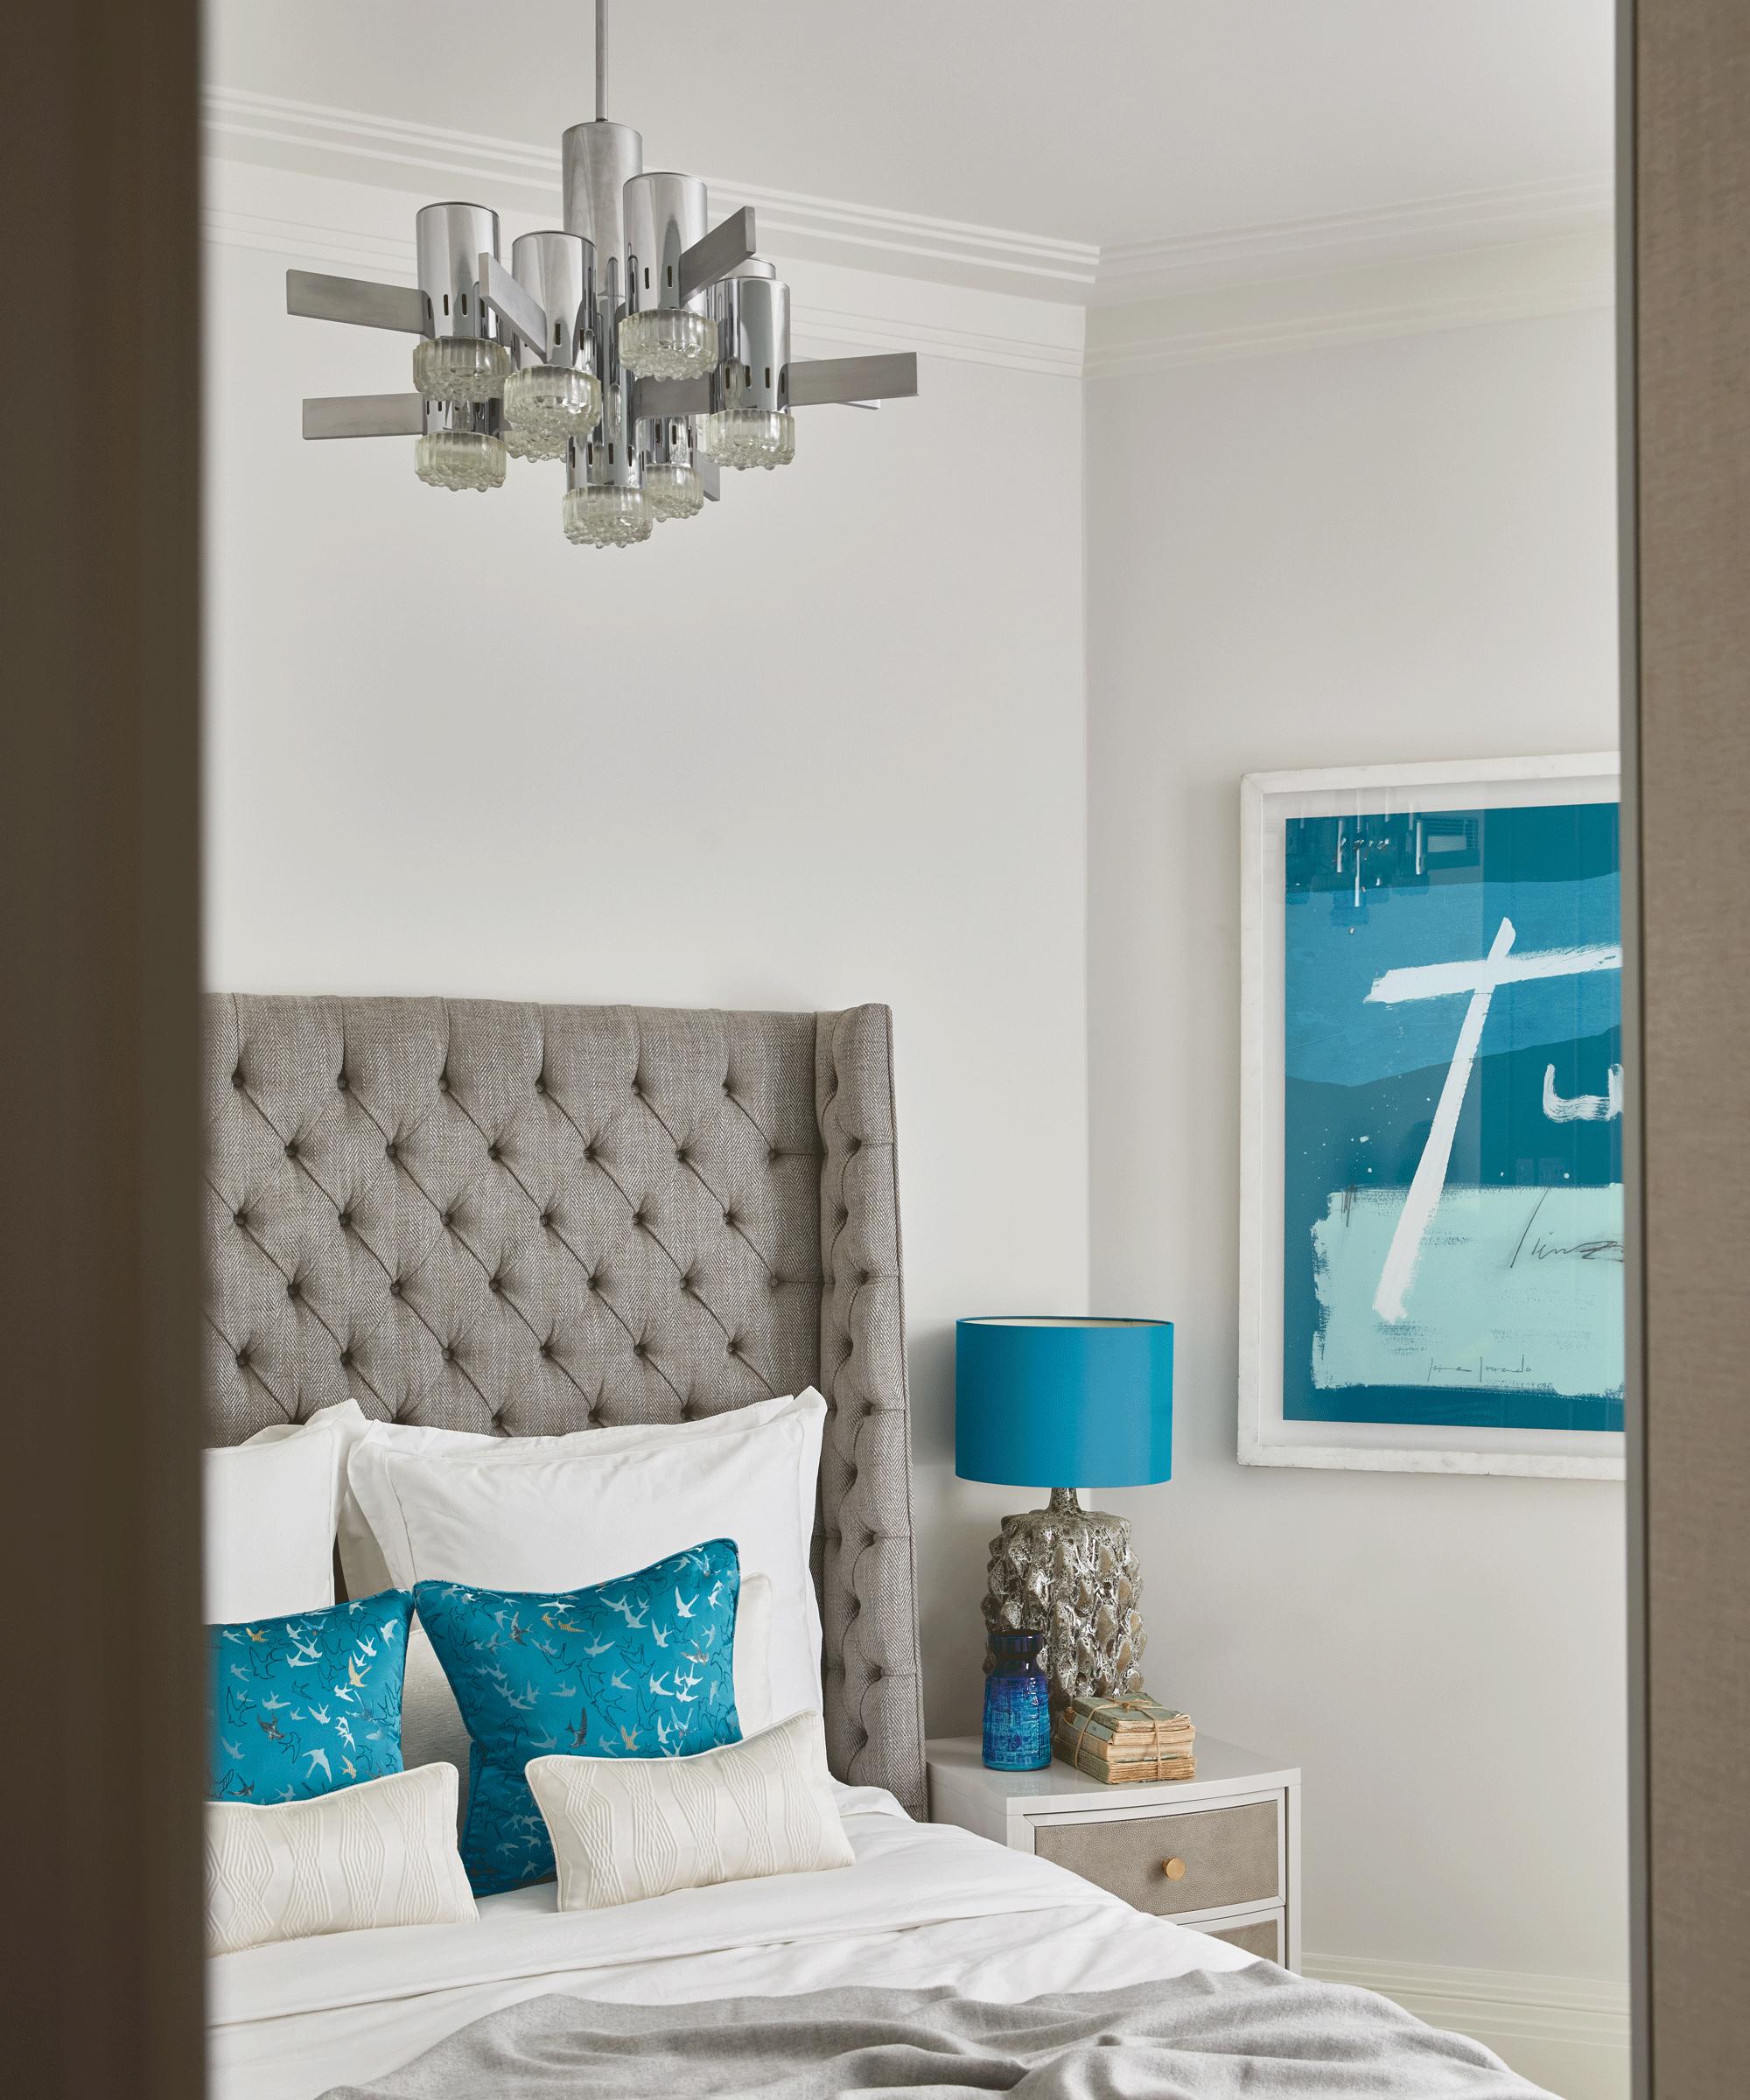 Neutral bedroom with teal accessories